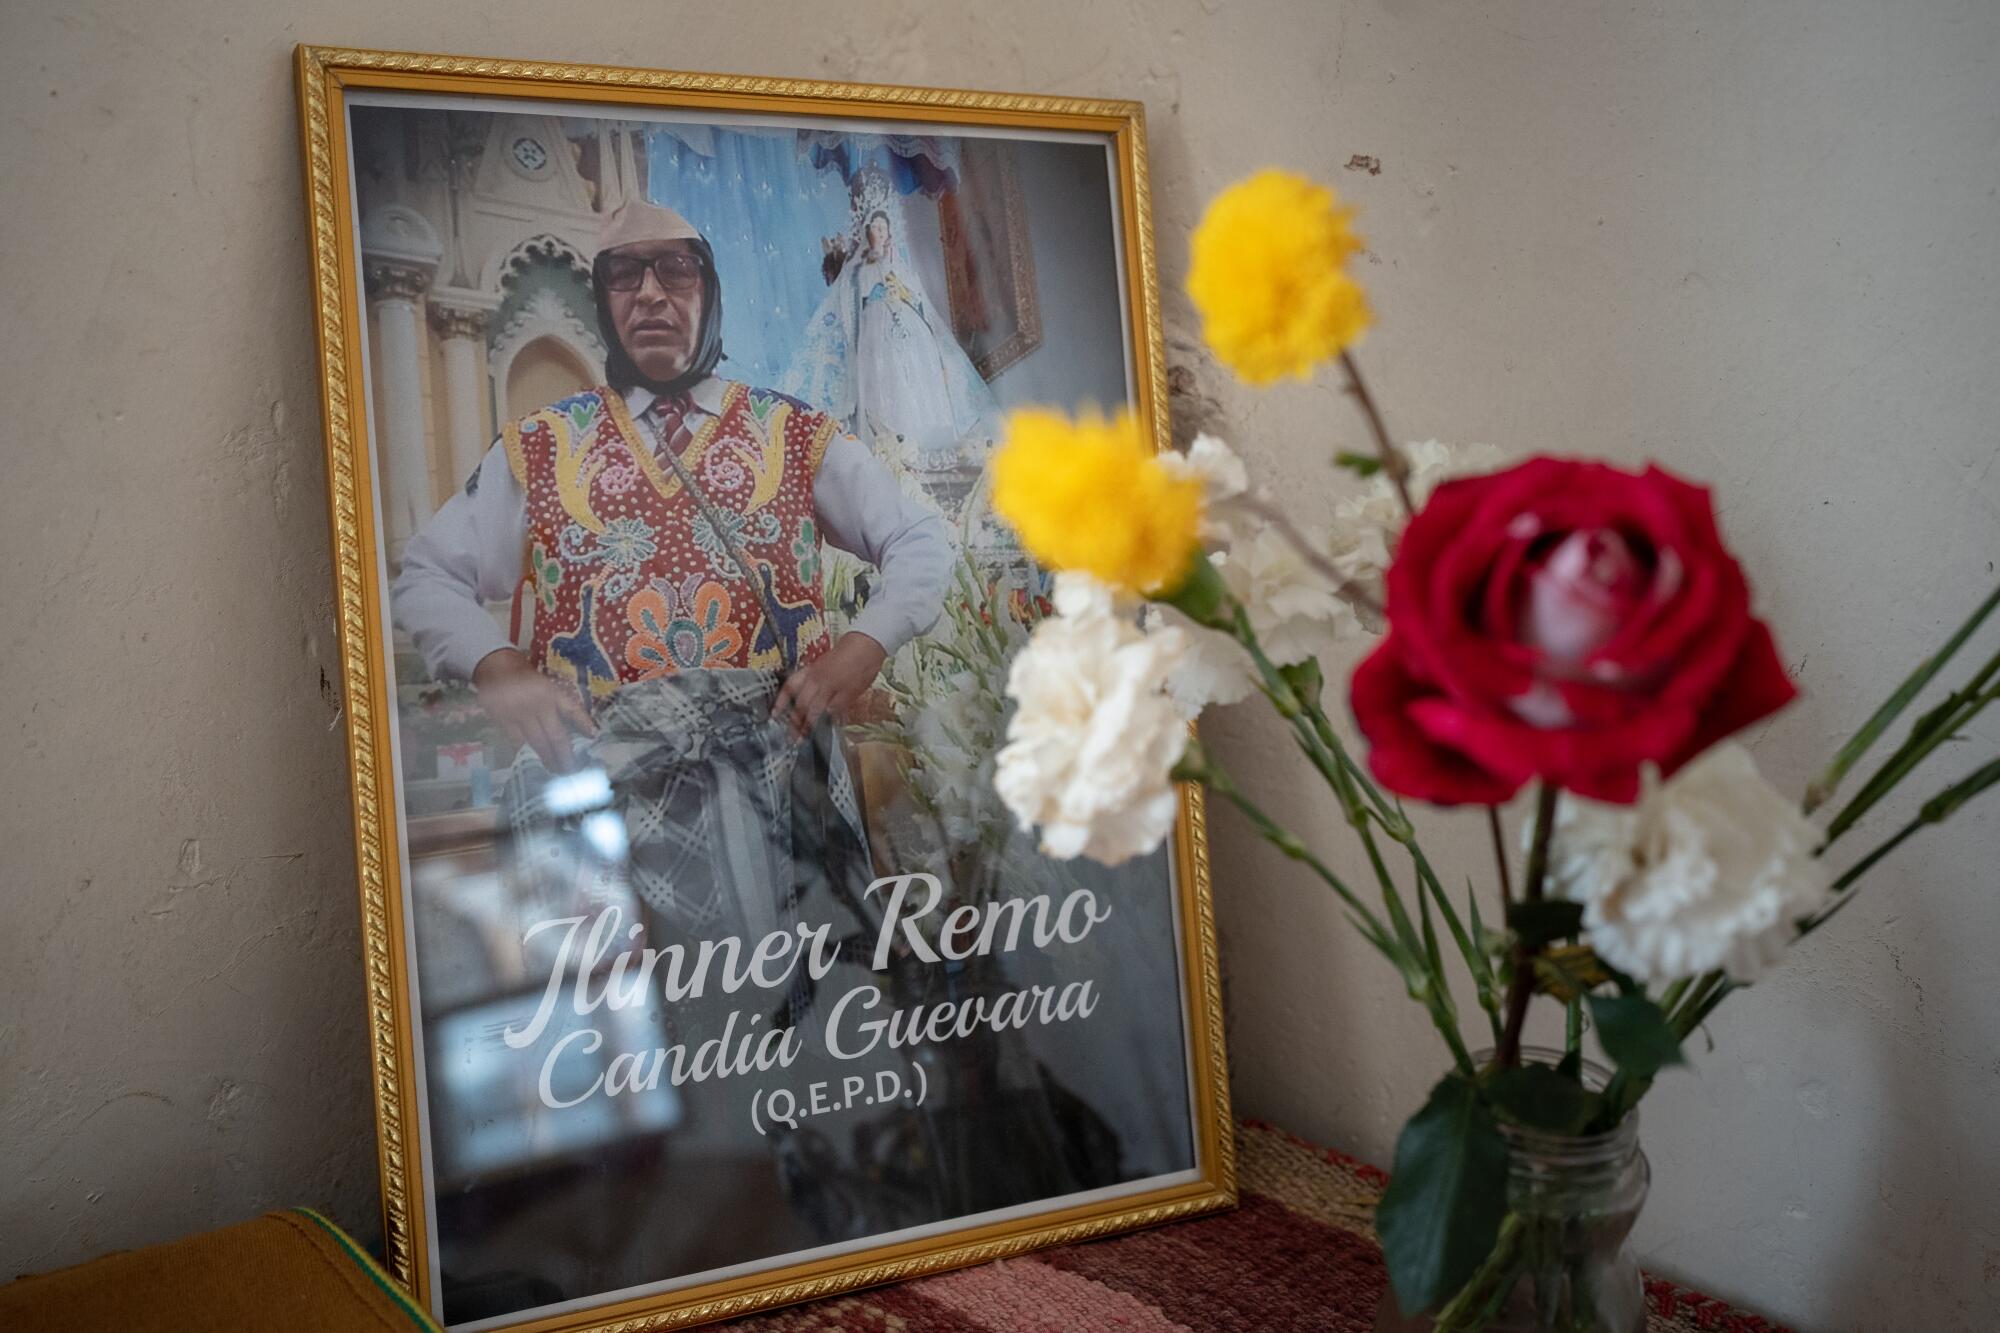 A photograph of Remo Candia Guevara sits beside a vase of flowers.